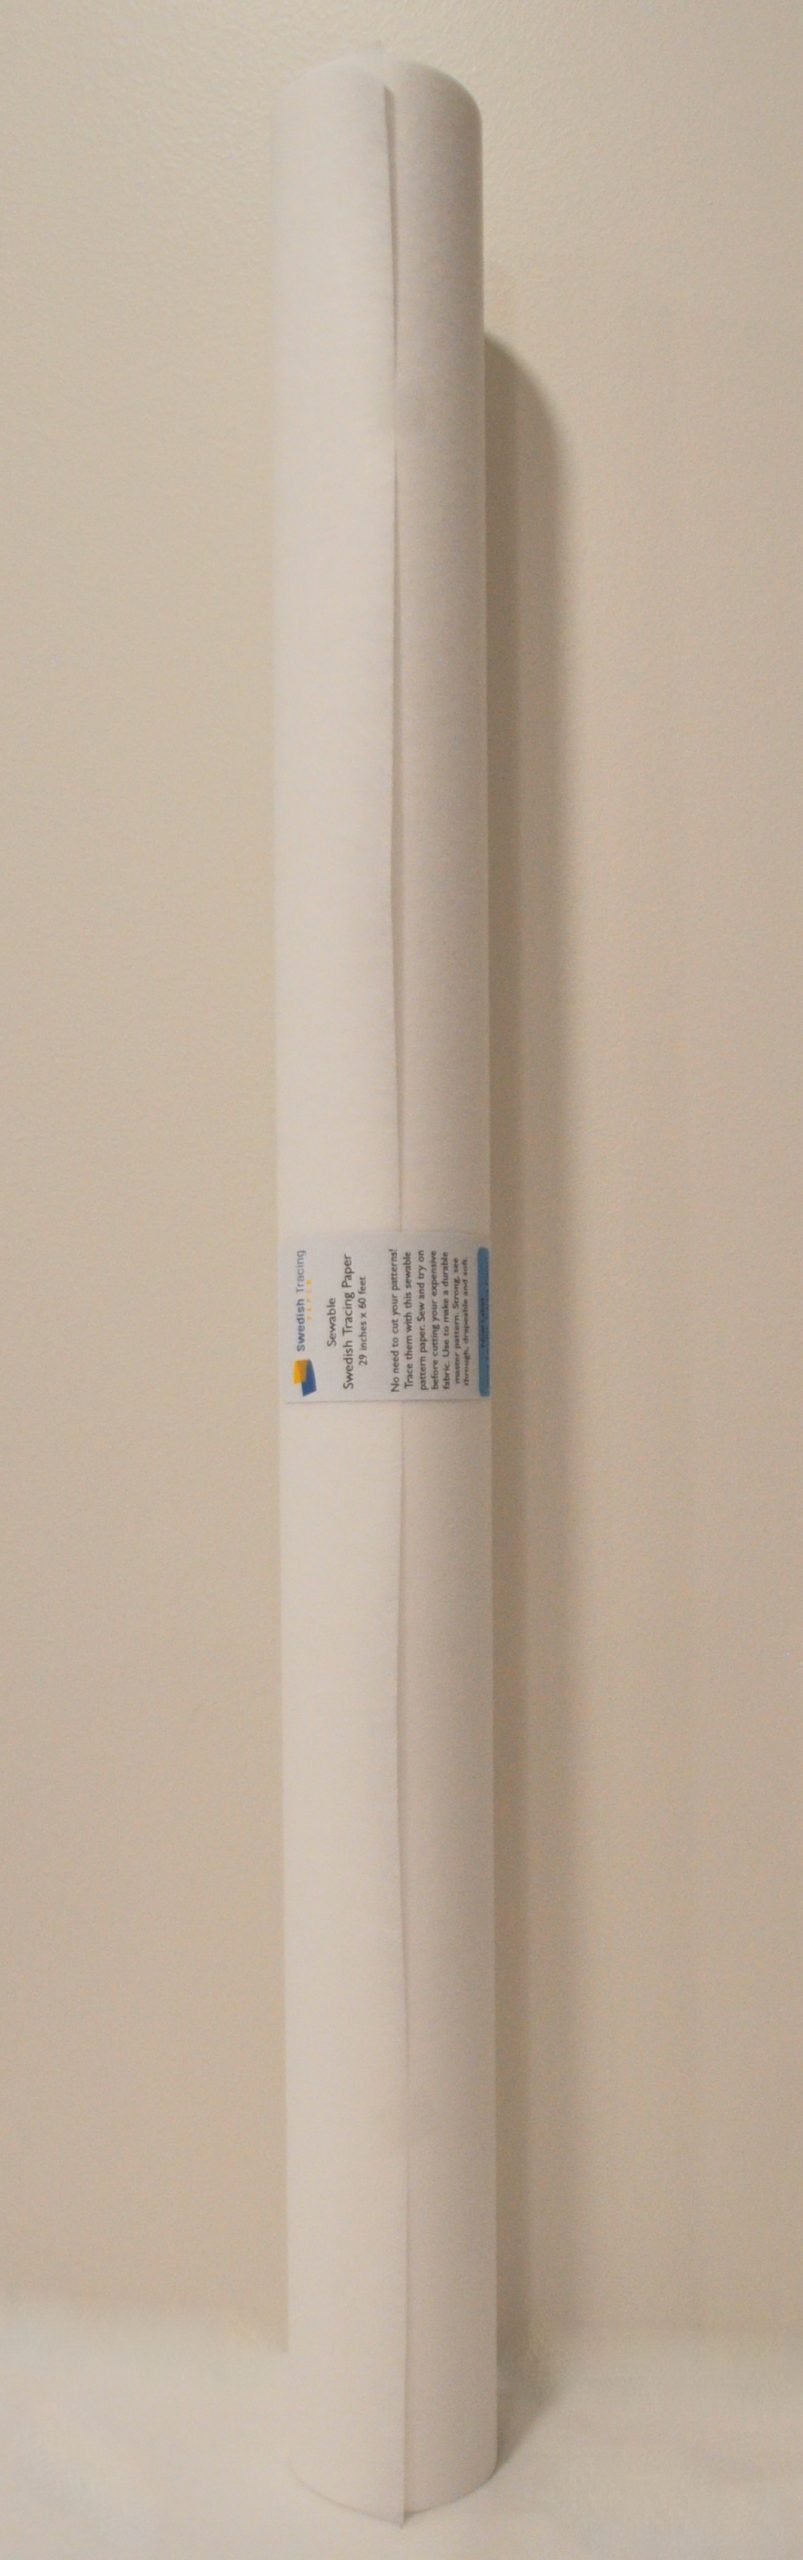 Swedish Tracing Paper 29 in X 60 ft 1 Roll – Swedish Tracing Paper